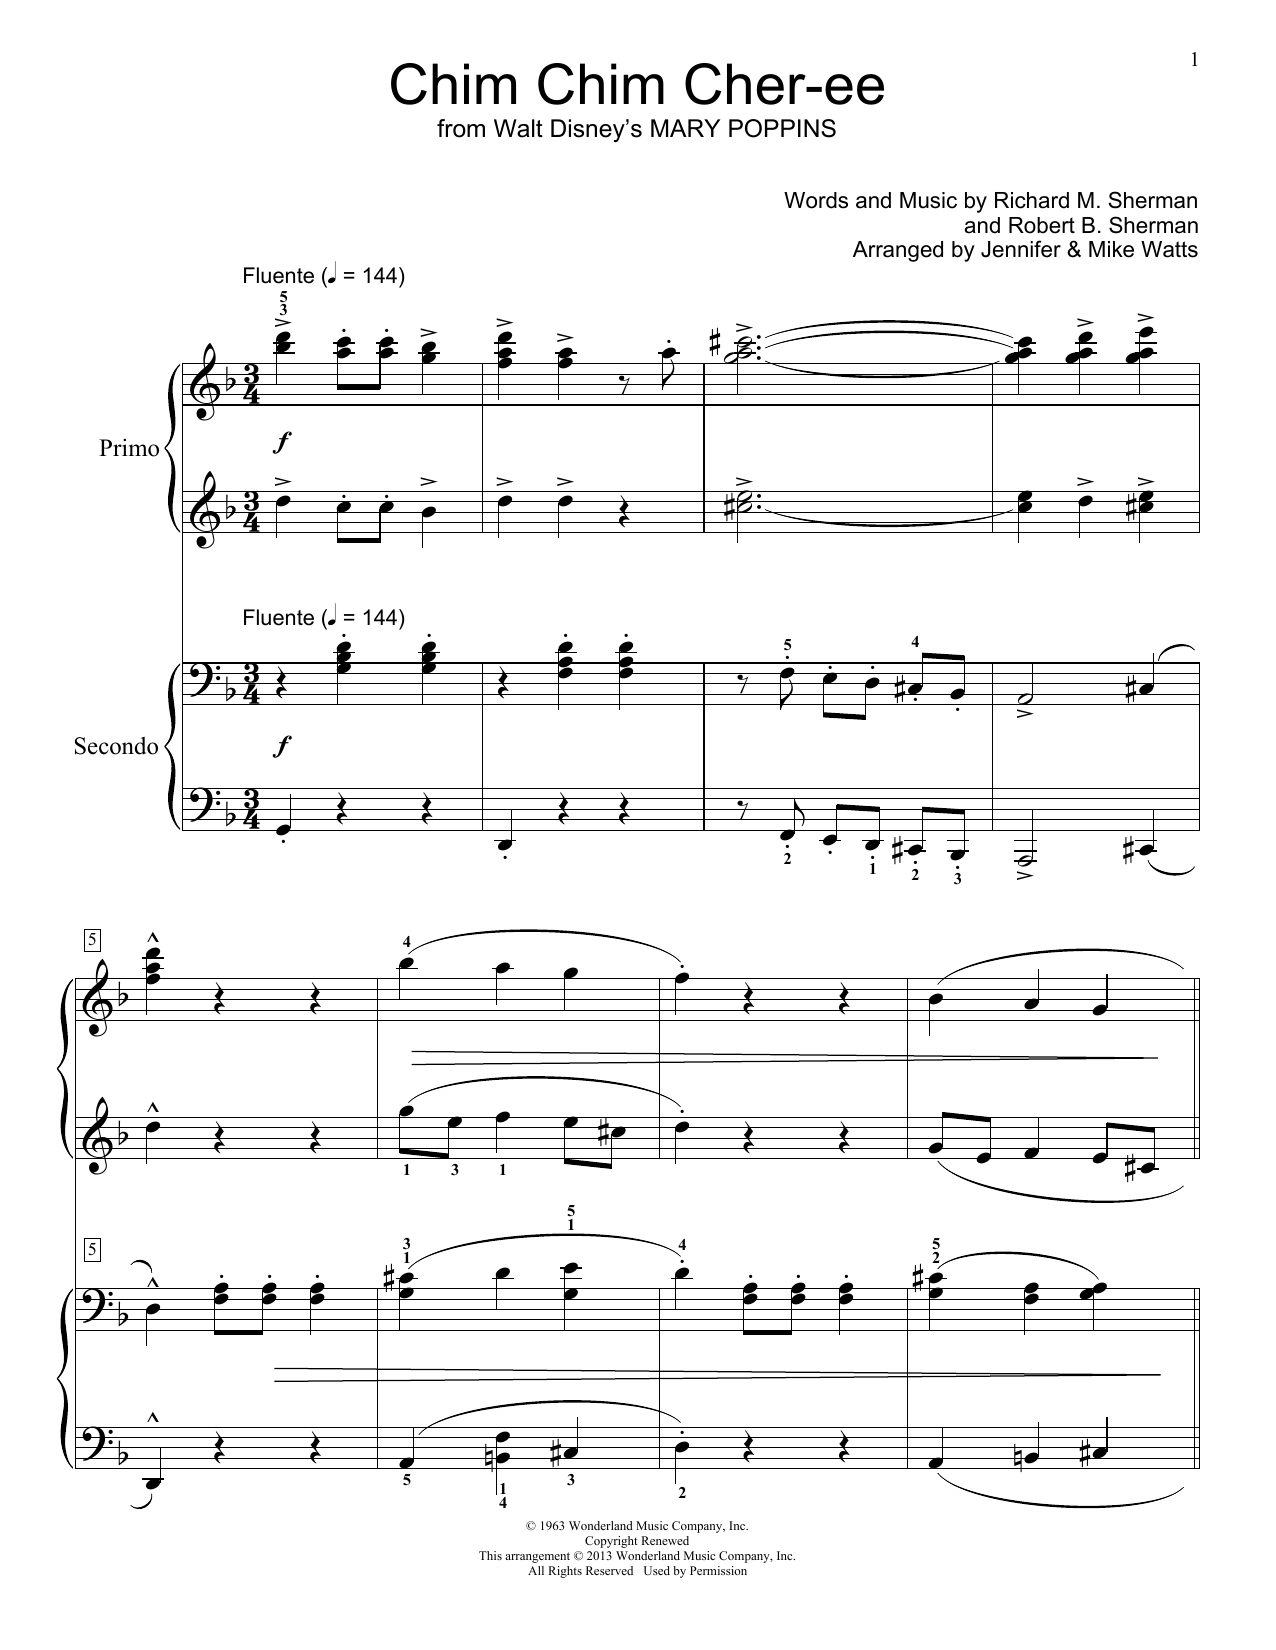 Download Robert B. Sherman Chim Chim Cher-ee (from Mary Poppins) Sheet Music